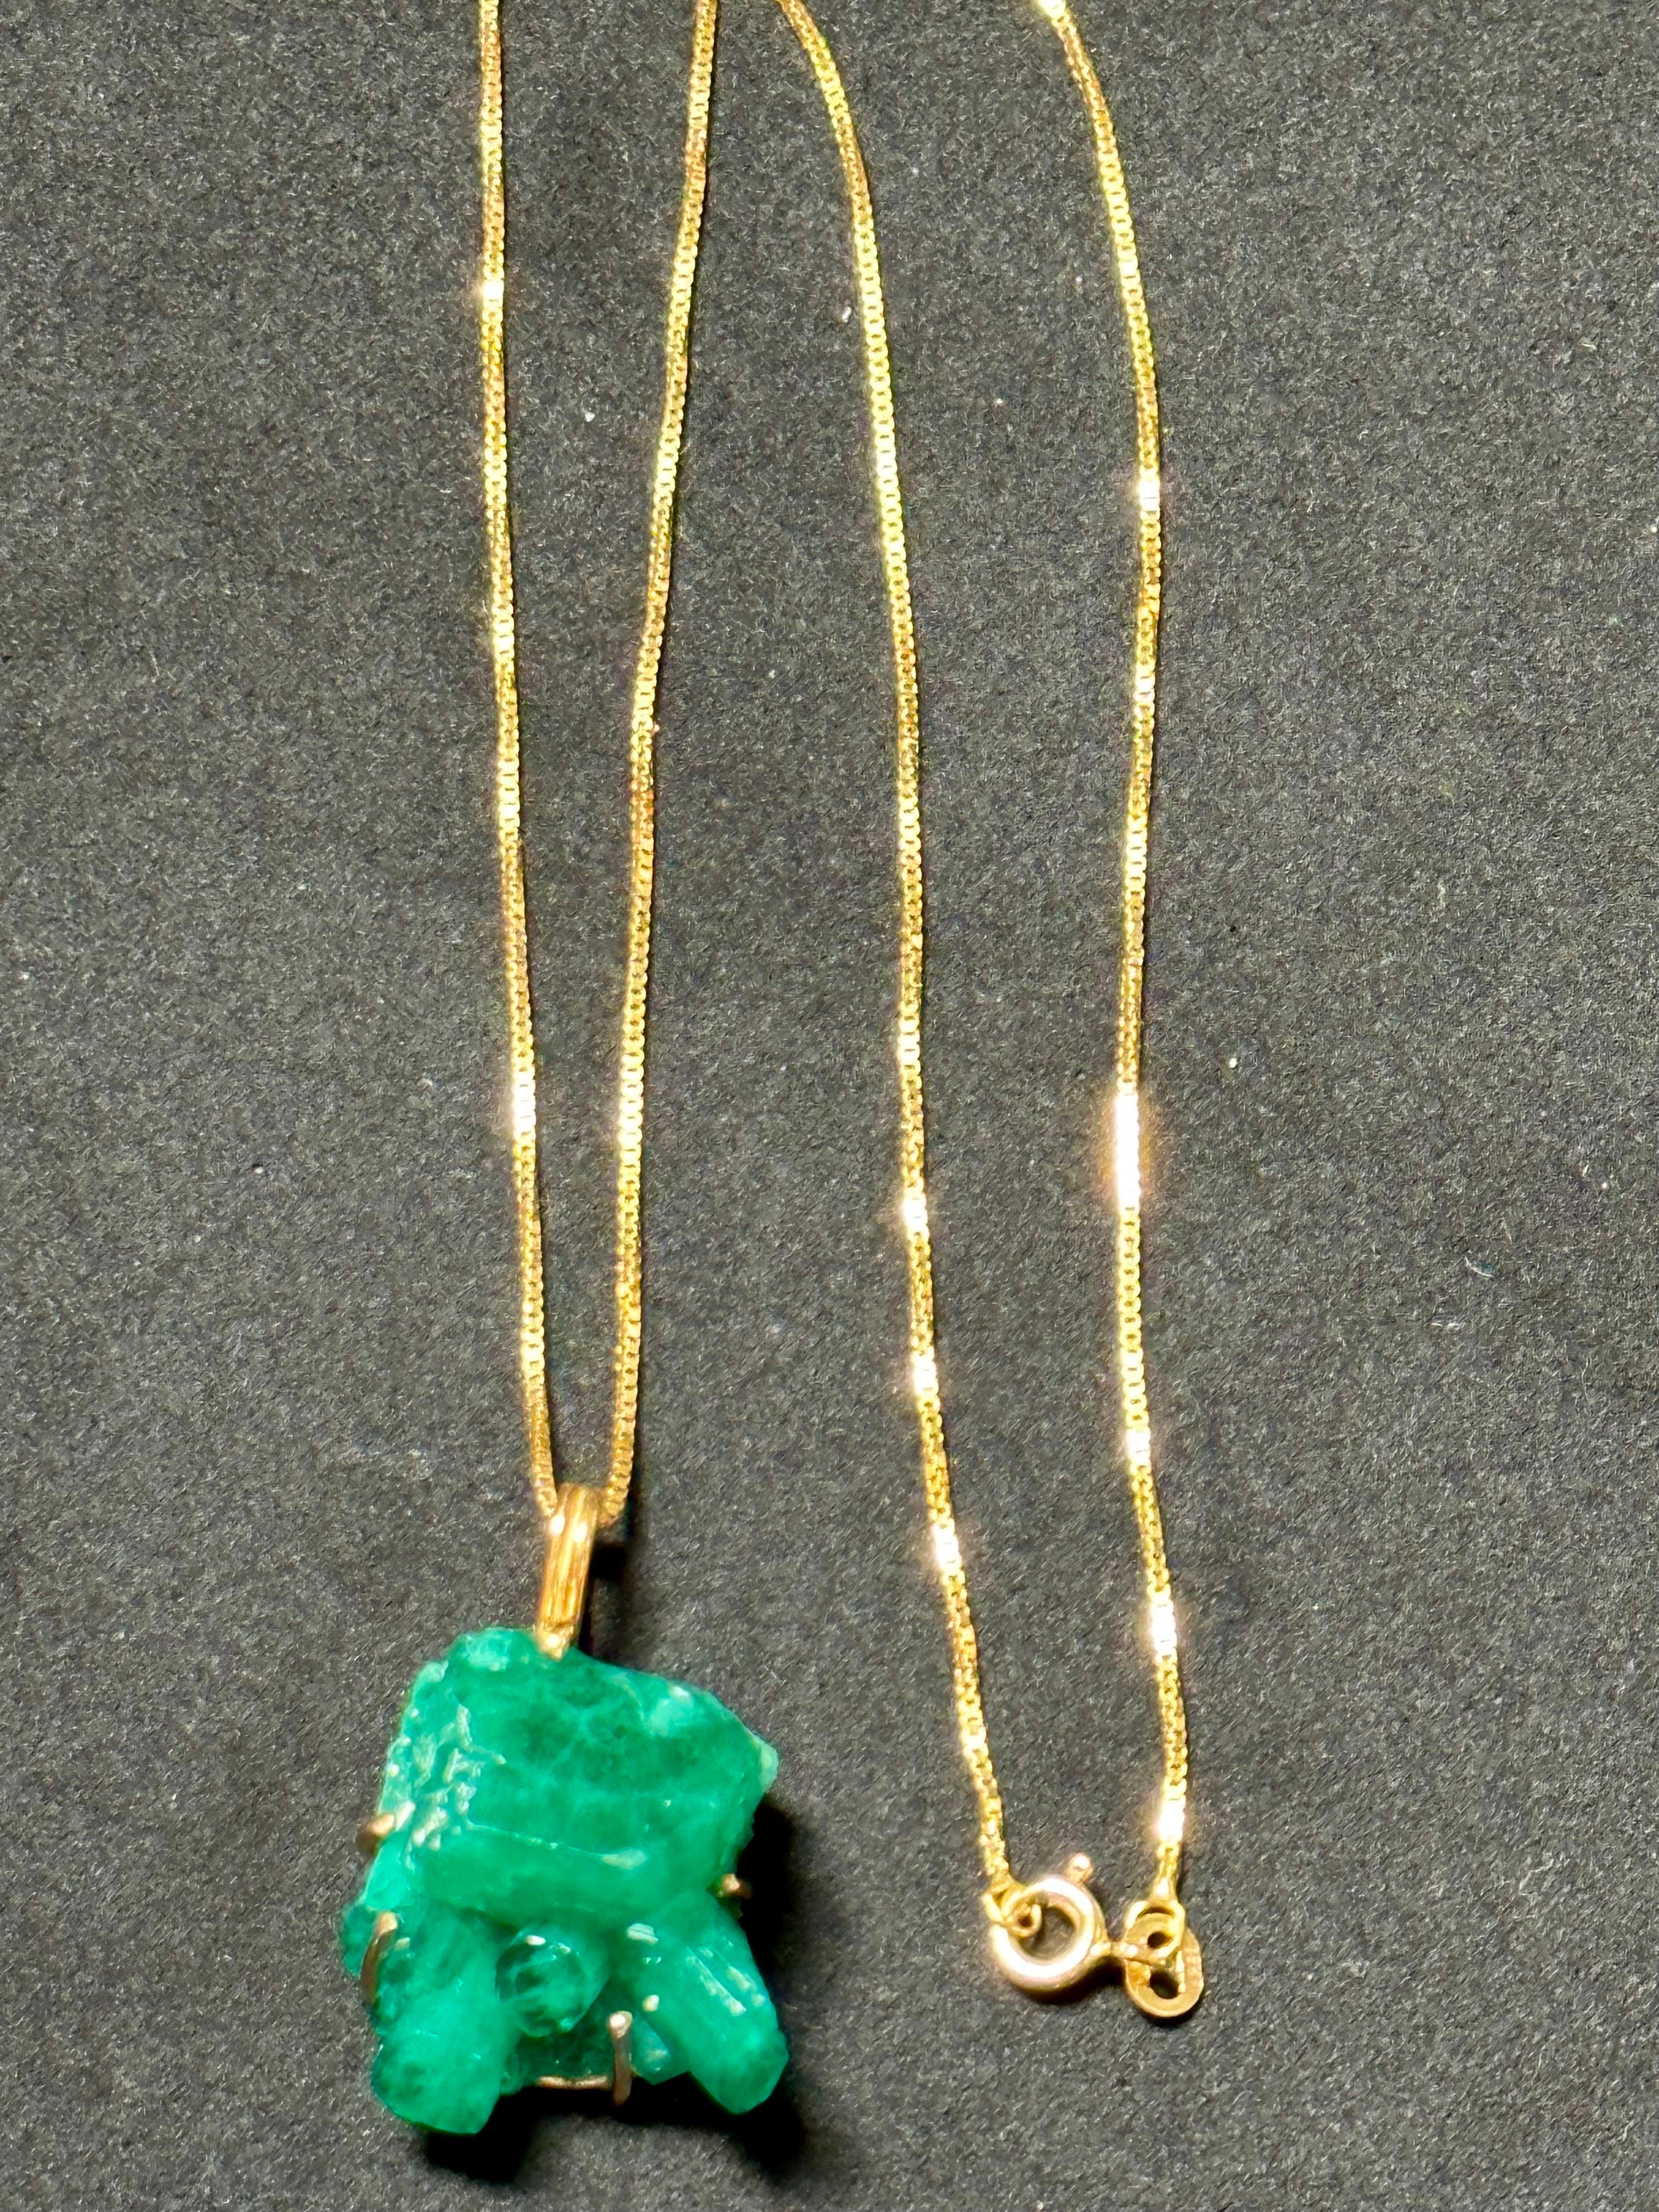 25 Carat Colombian Emerald Rough Pendent/Necklace 18 Karat Gold with 18 KG Chain In Excellent Condition For Sale In New York, NY